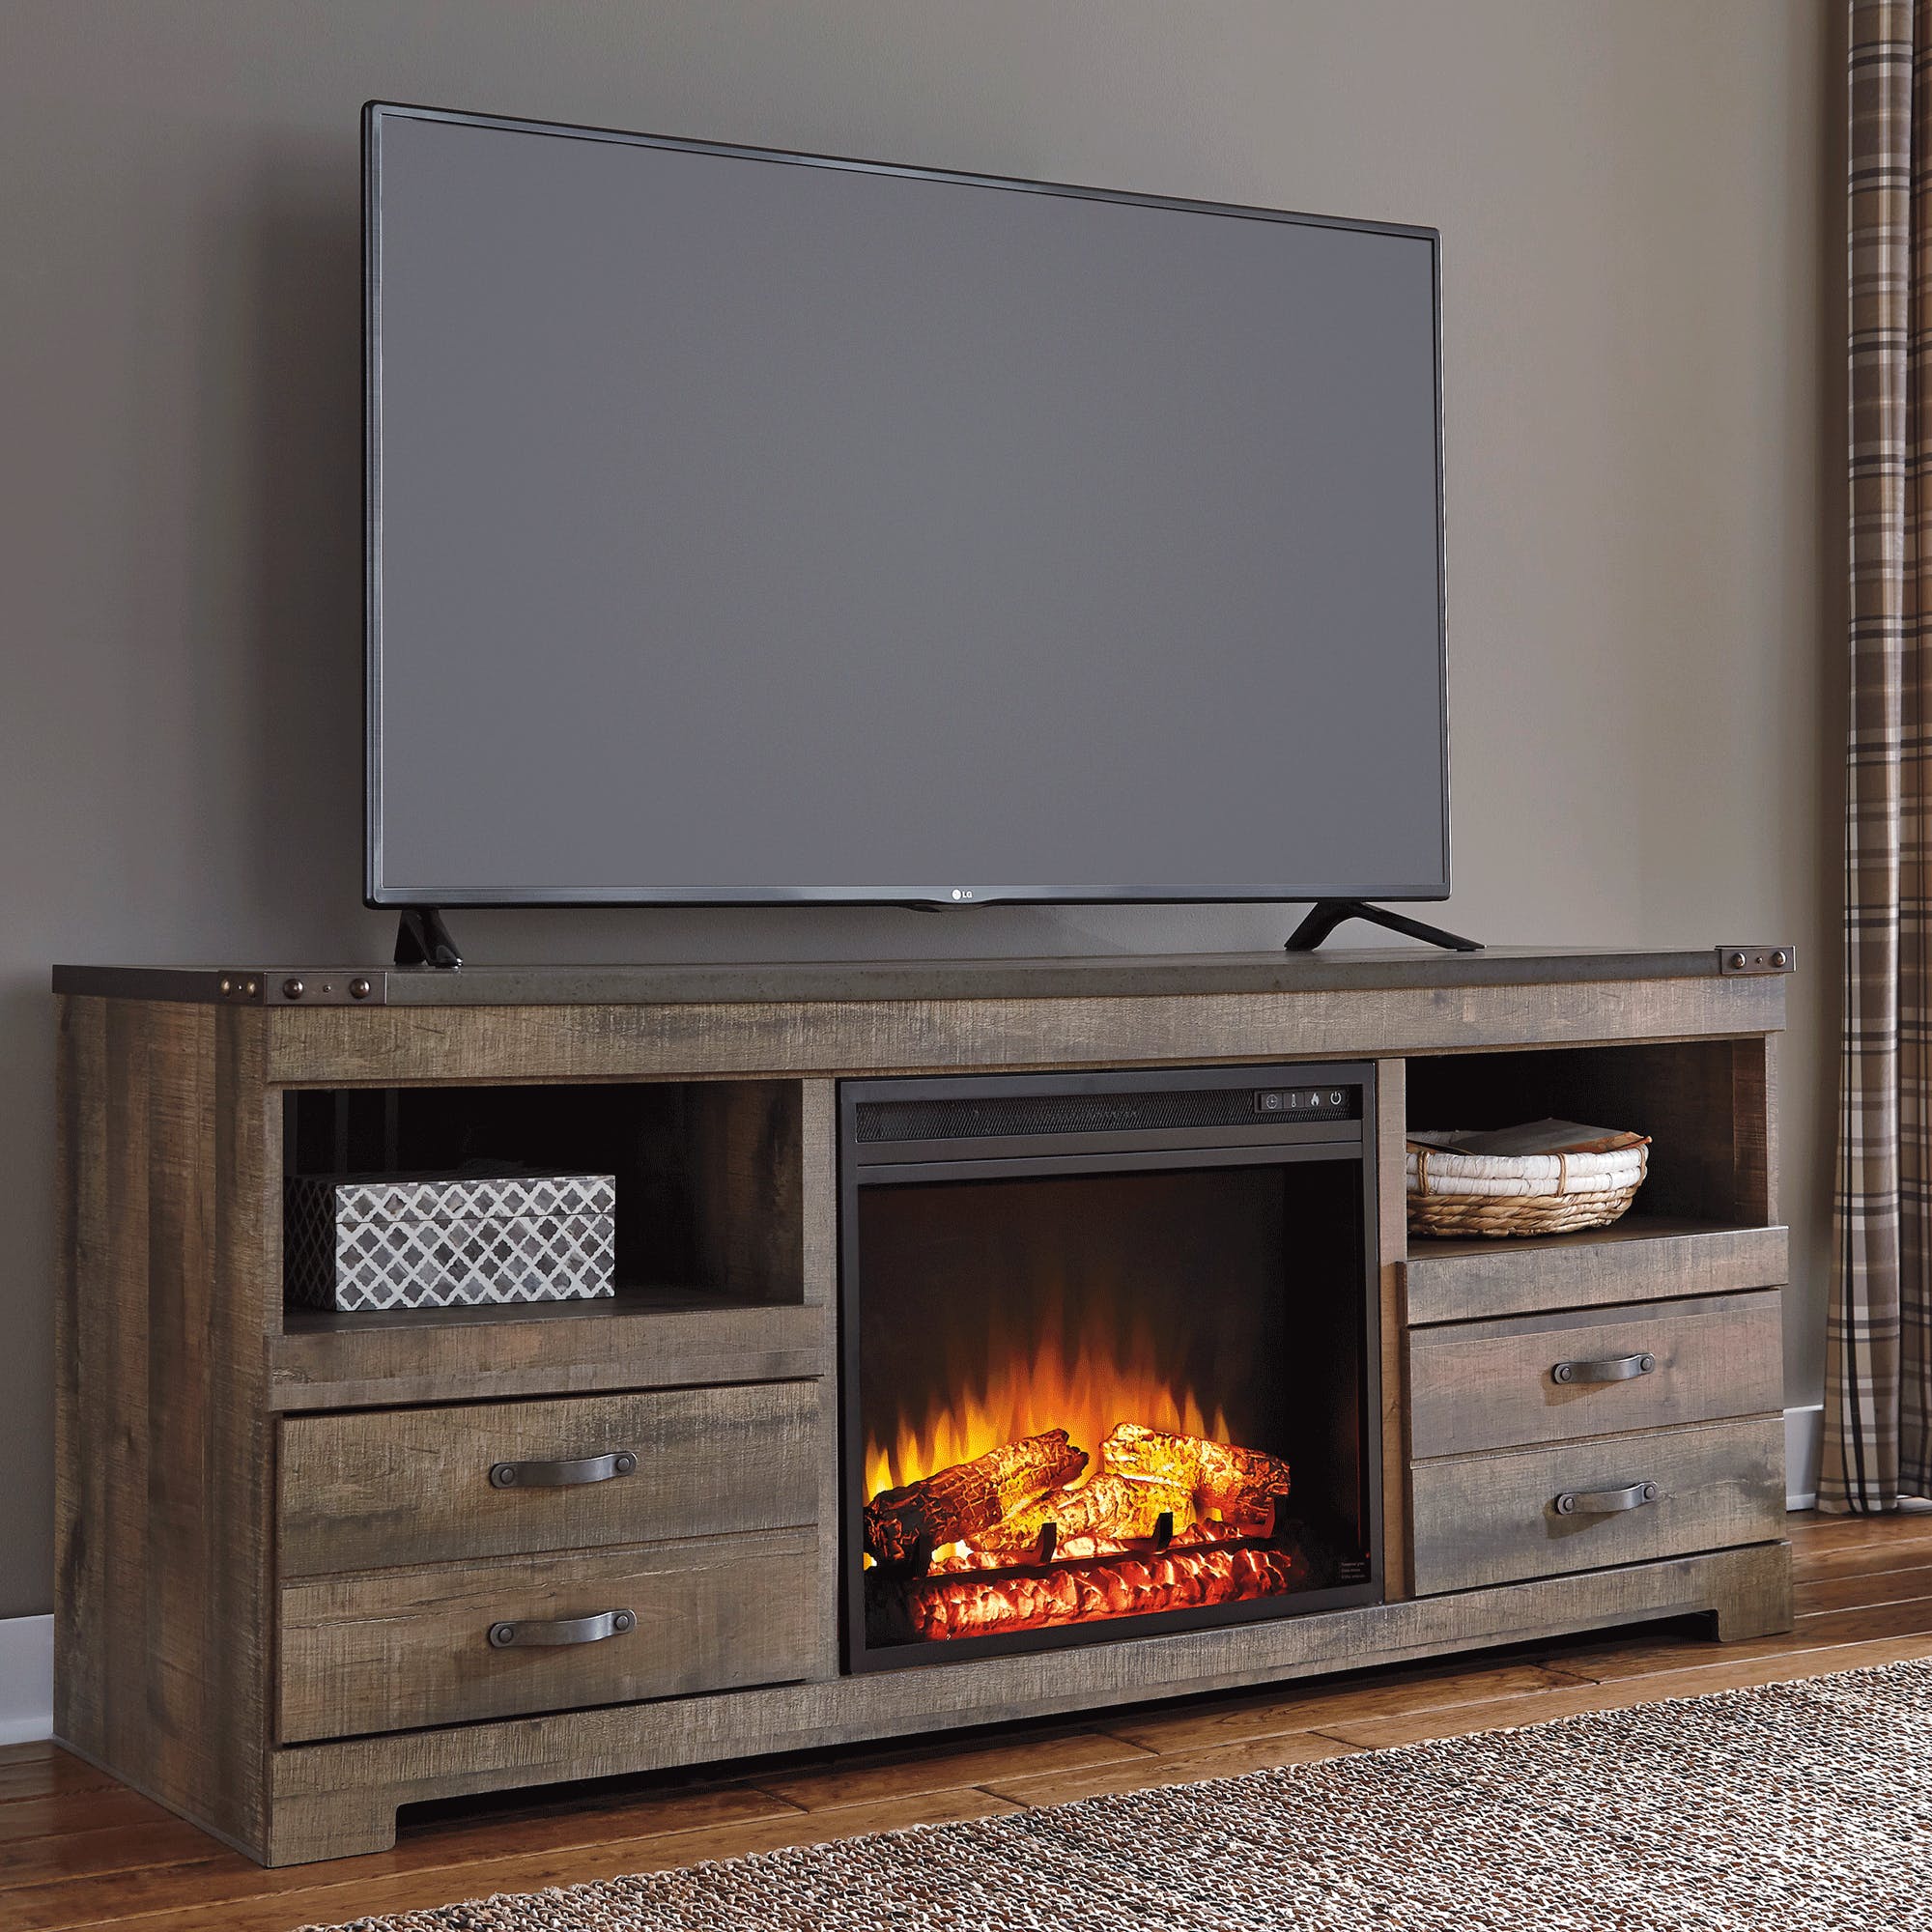 Fireplace Tv Stand with Bluetooth Speakers Inspirational Entertainment Centers Entertainment Center with Fireplace